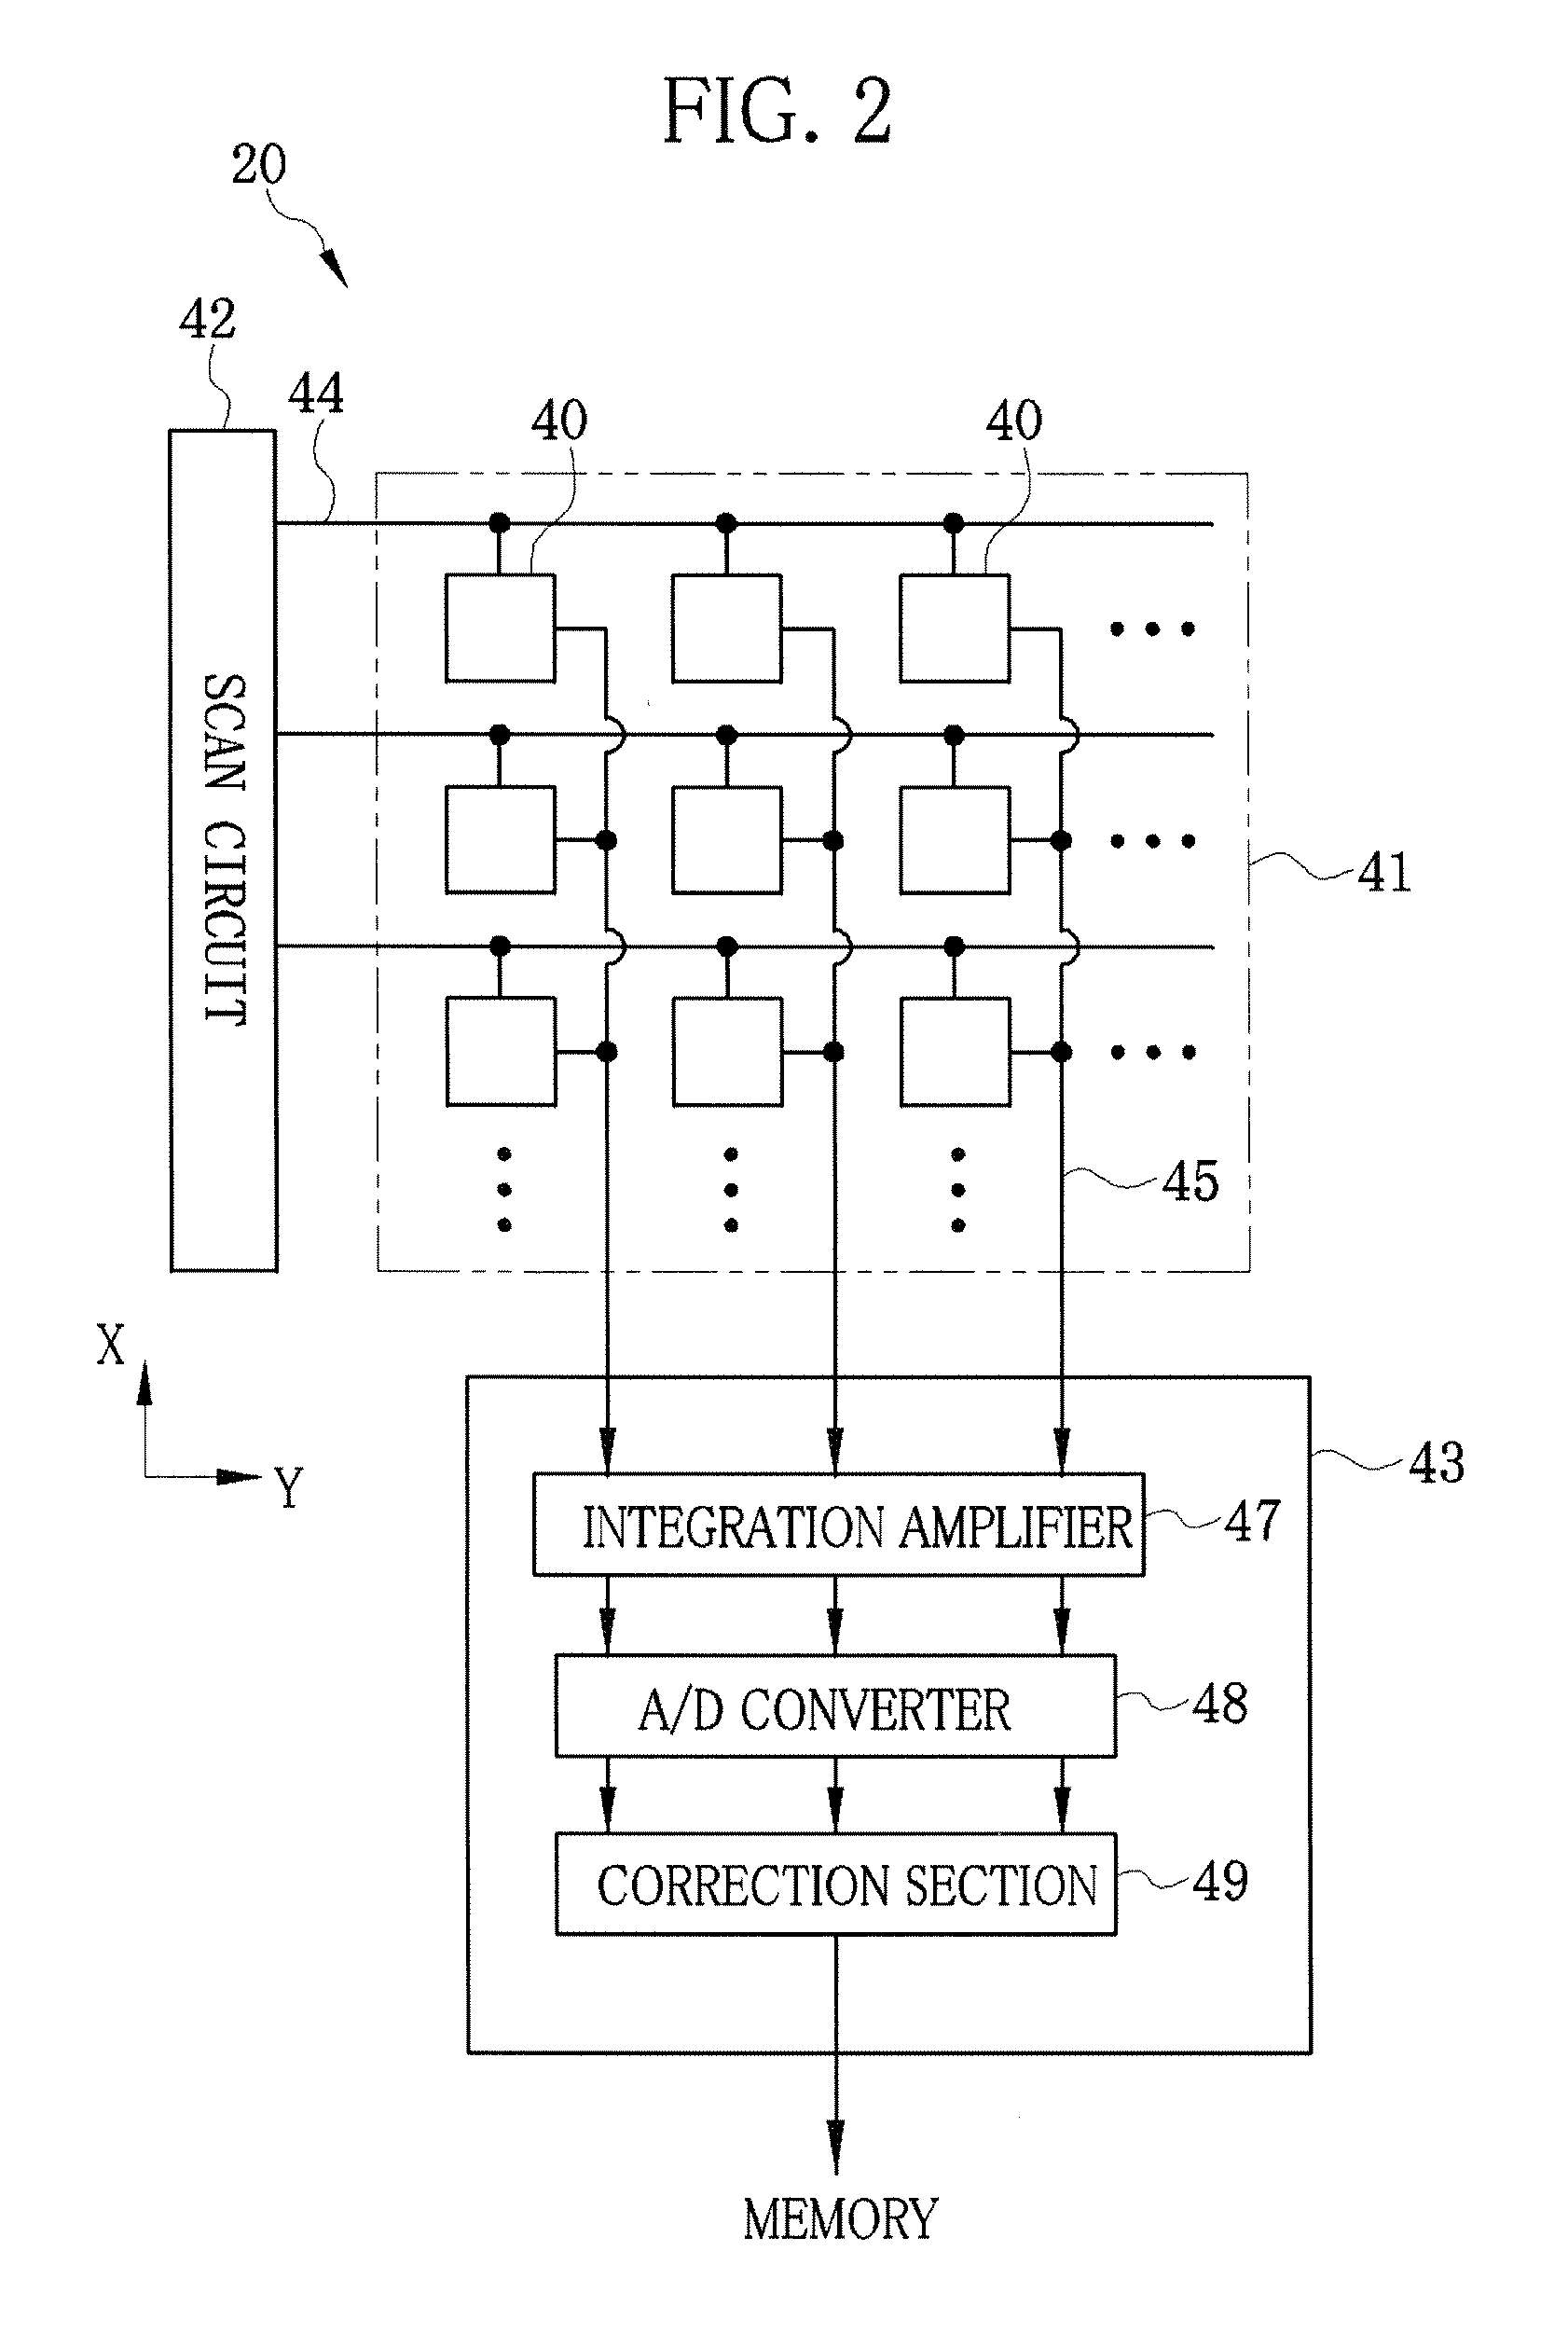 Radiation imaging system and method